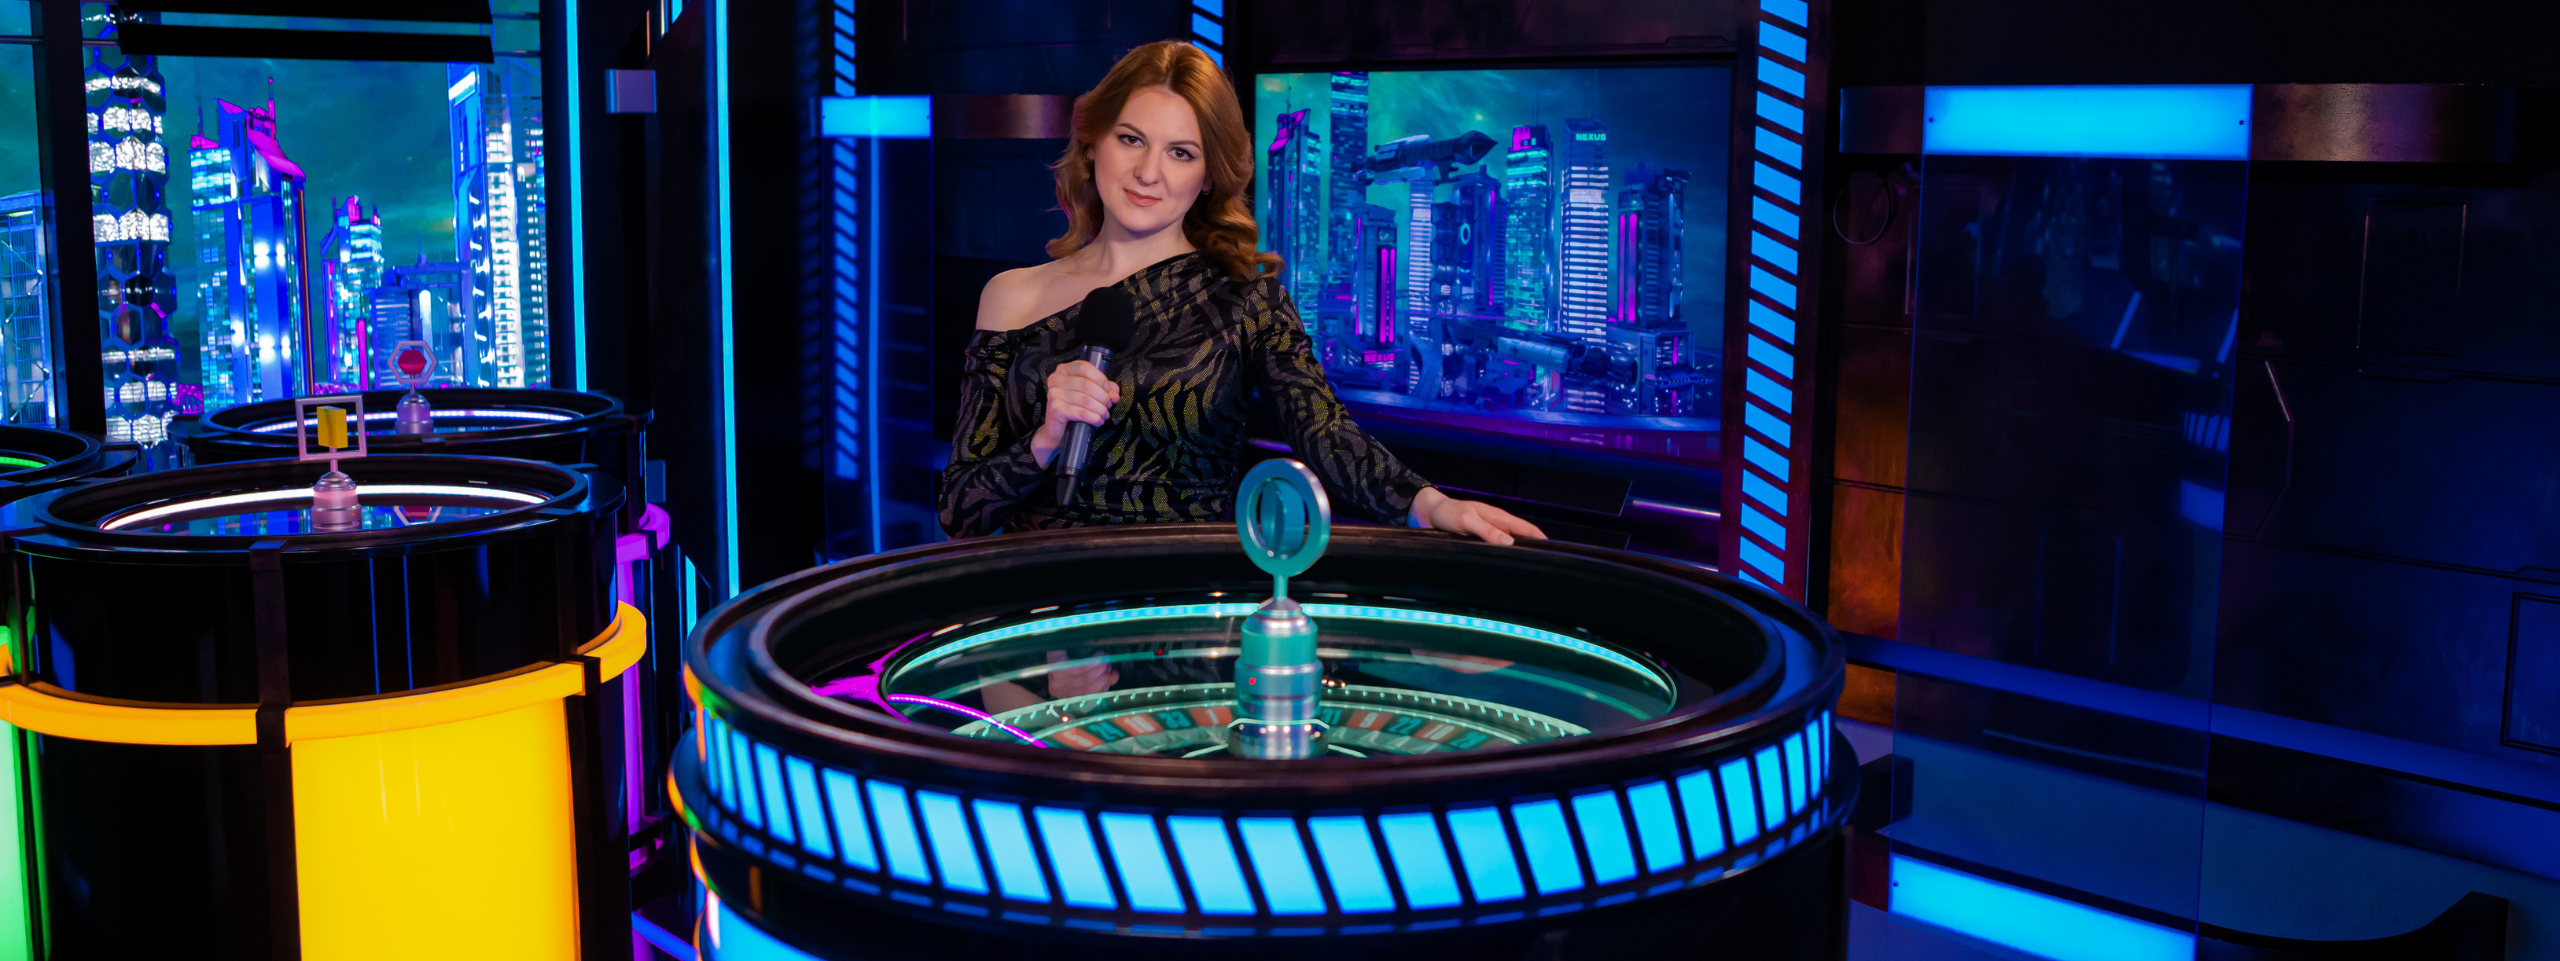 Female game presenter in front of roulette wheel in Nexus Roulette.